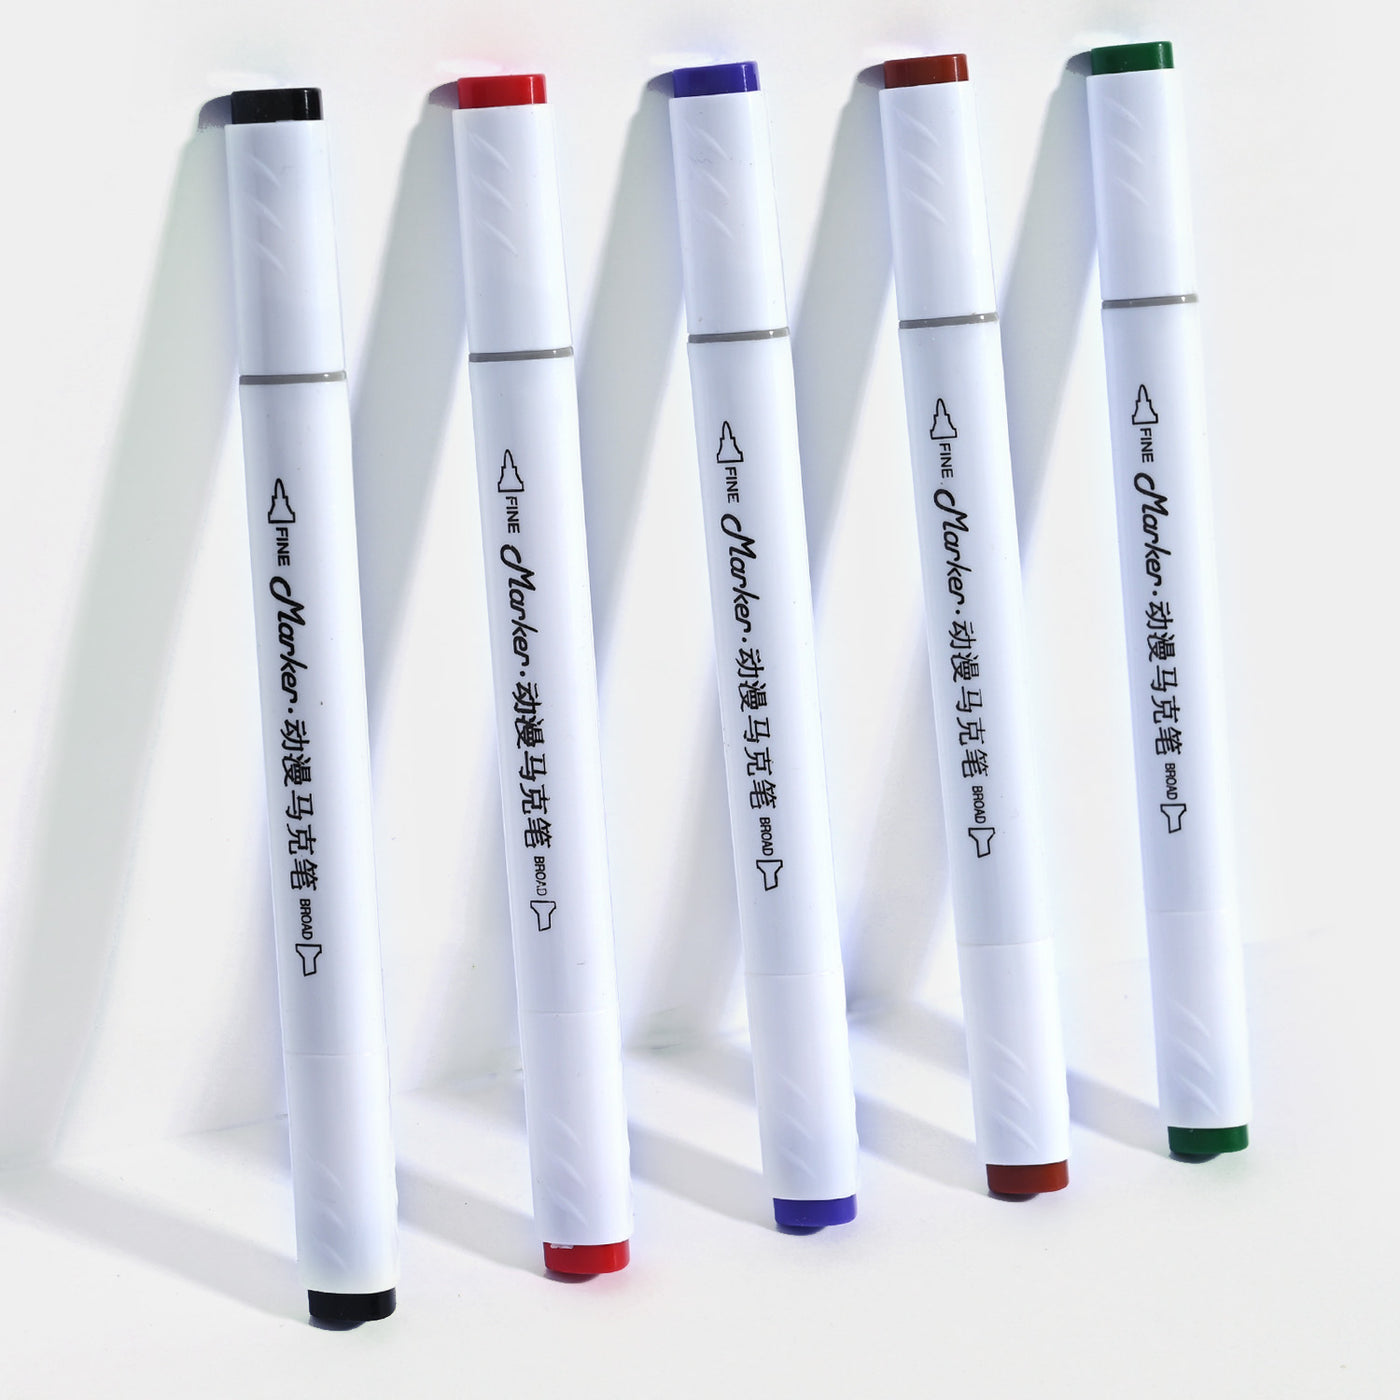 DOUBLE SIDED MARKER MULTICOLOR 12 PCS